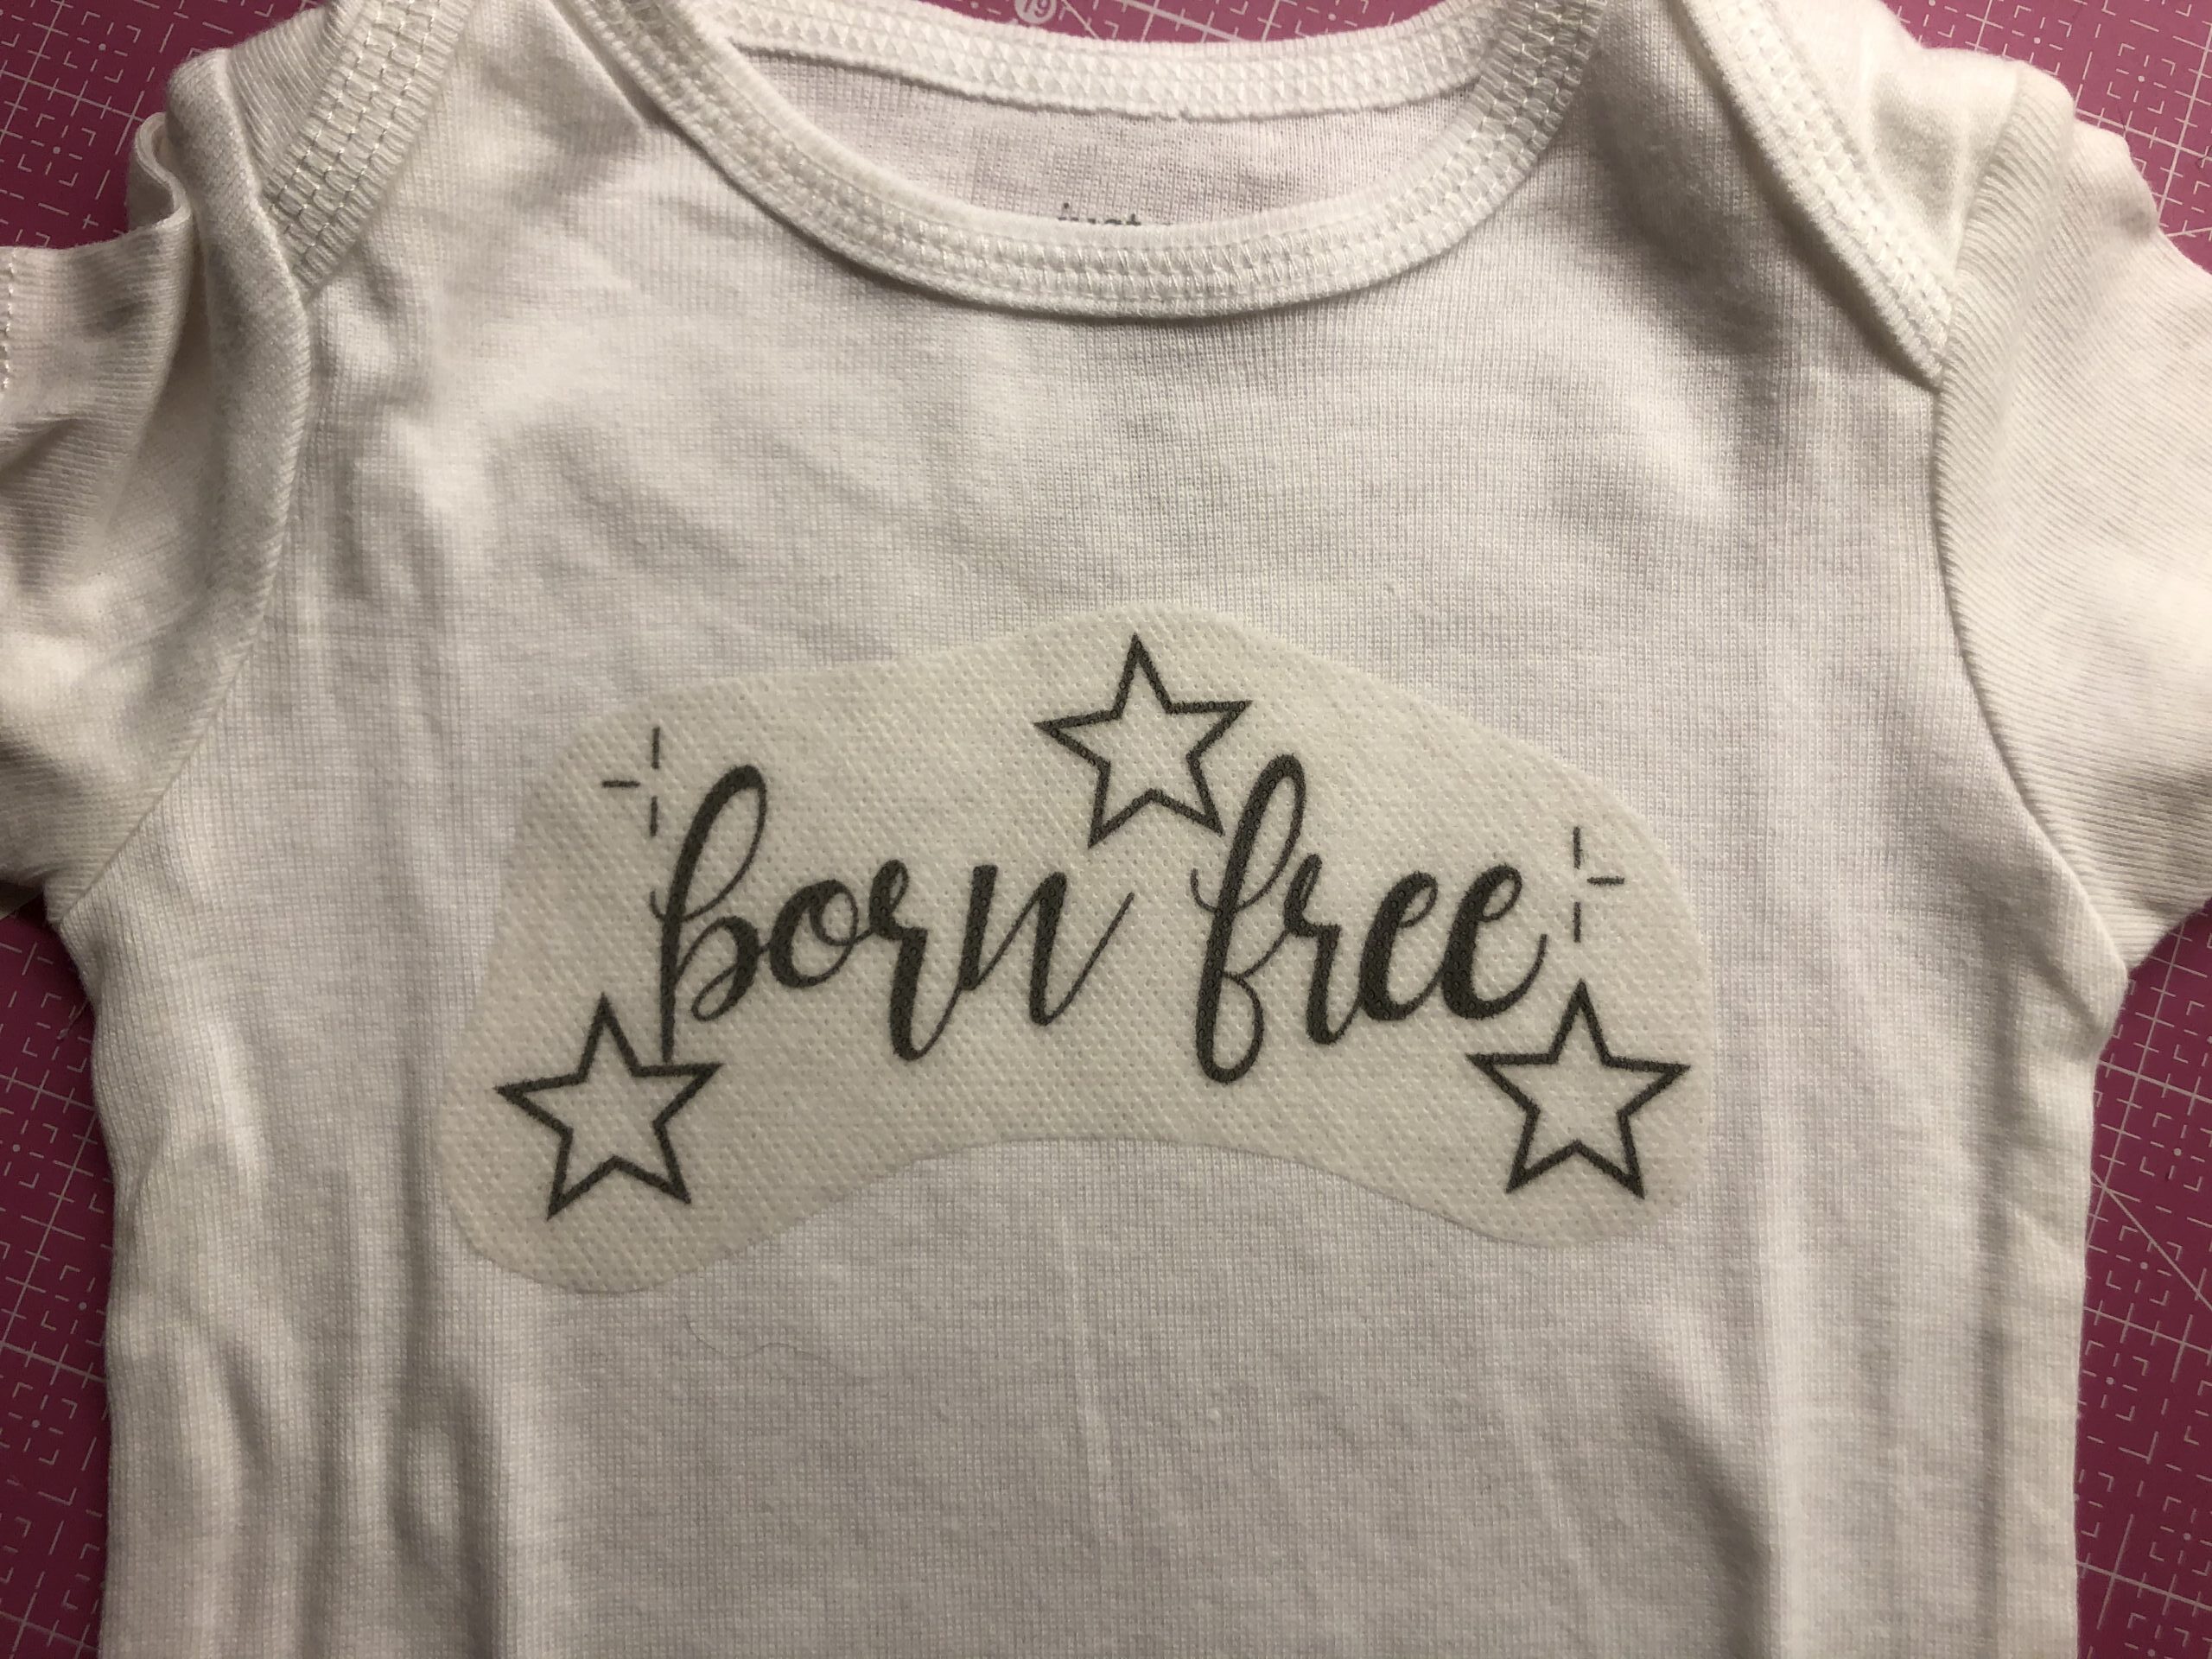 embroidered onesie with stabilizer attached